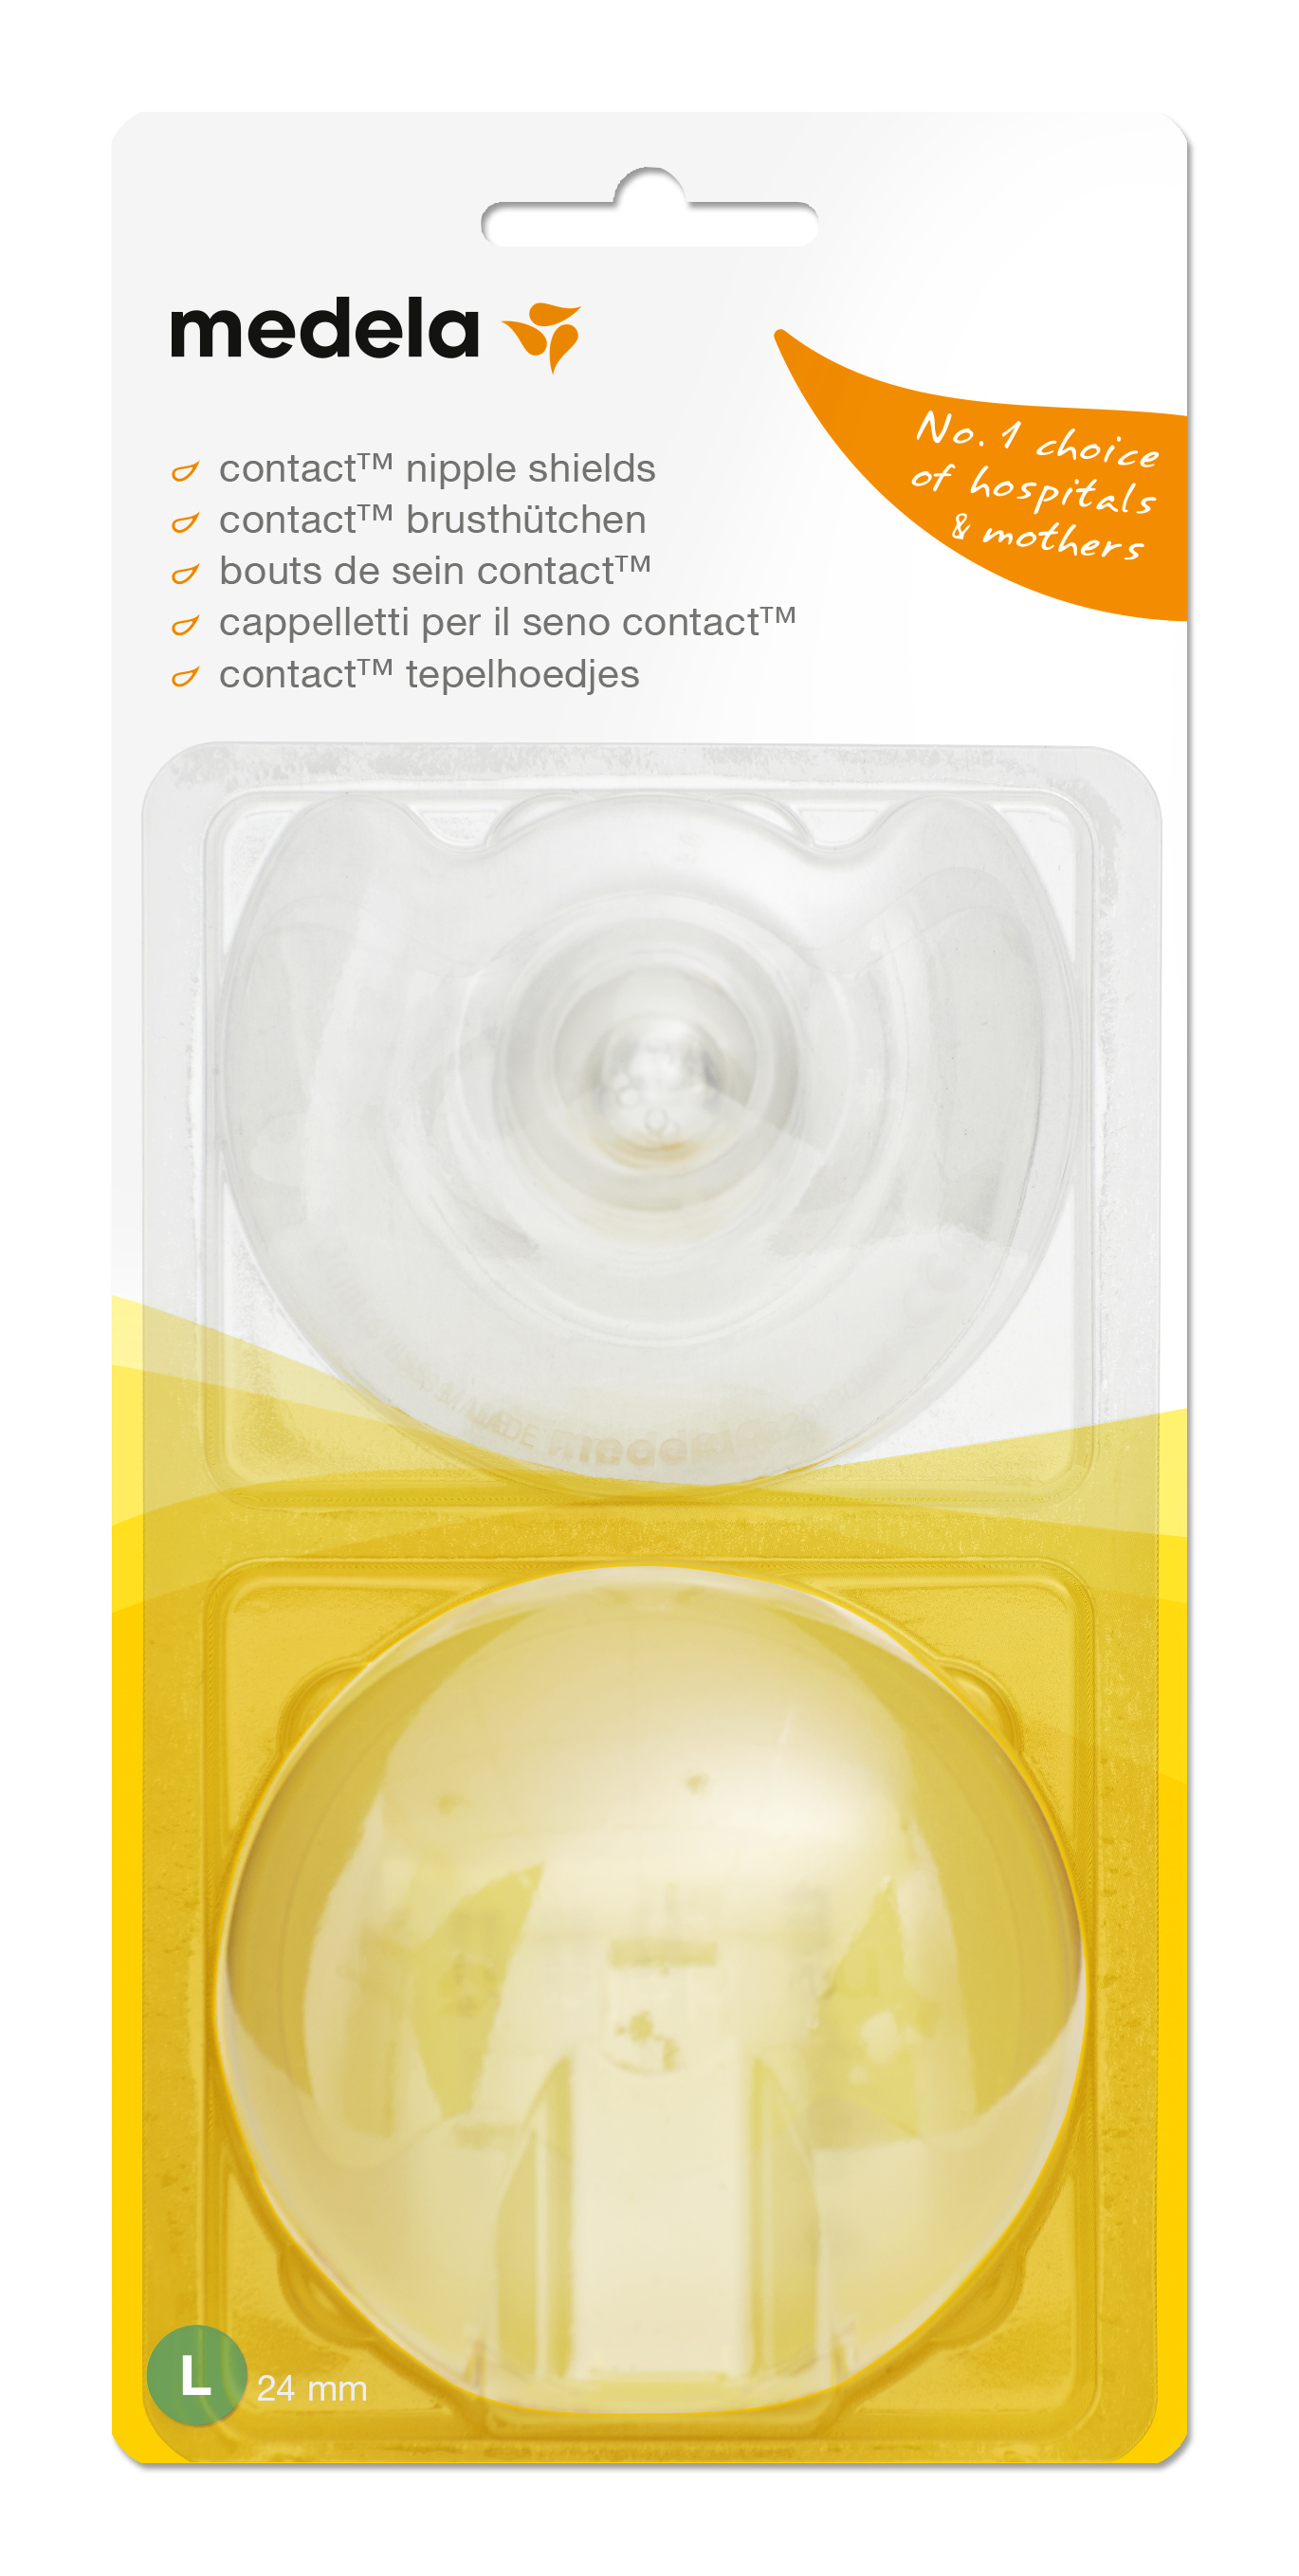 http://f.igtrend.kz/products/001/164/200_1615_packshot_contact_nipple_shields_l.jpg